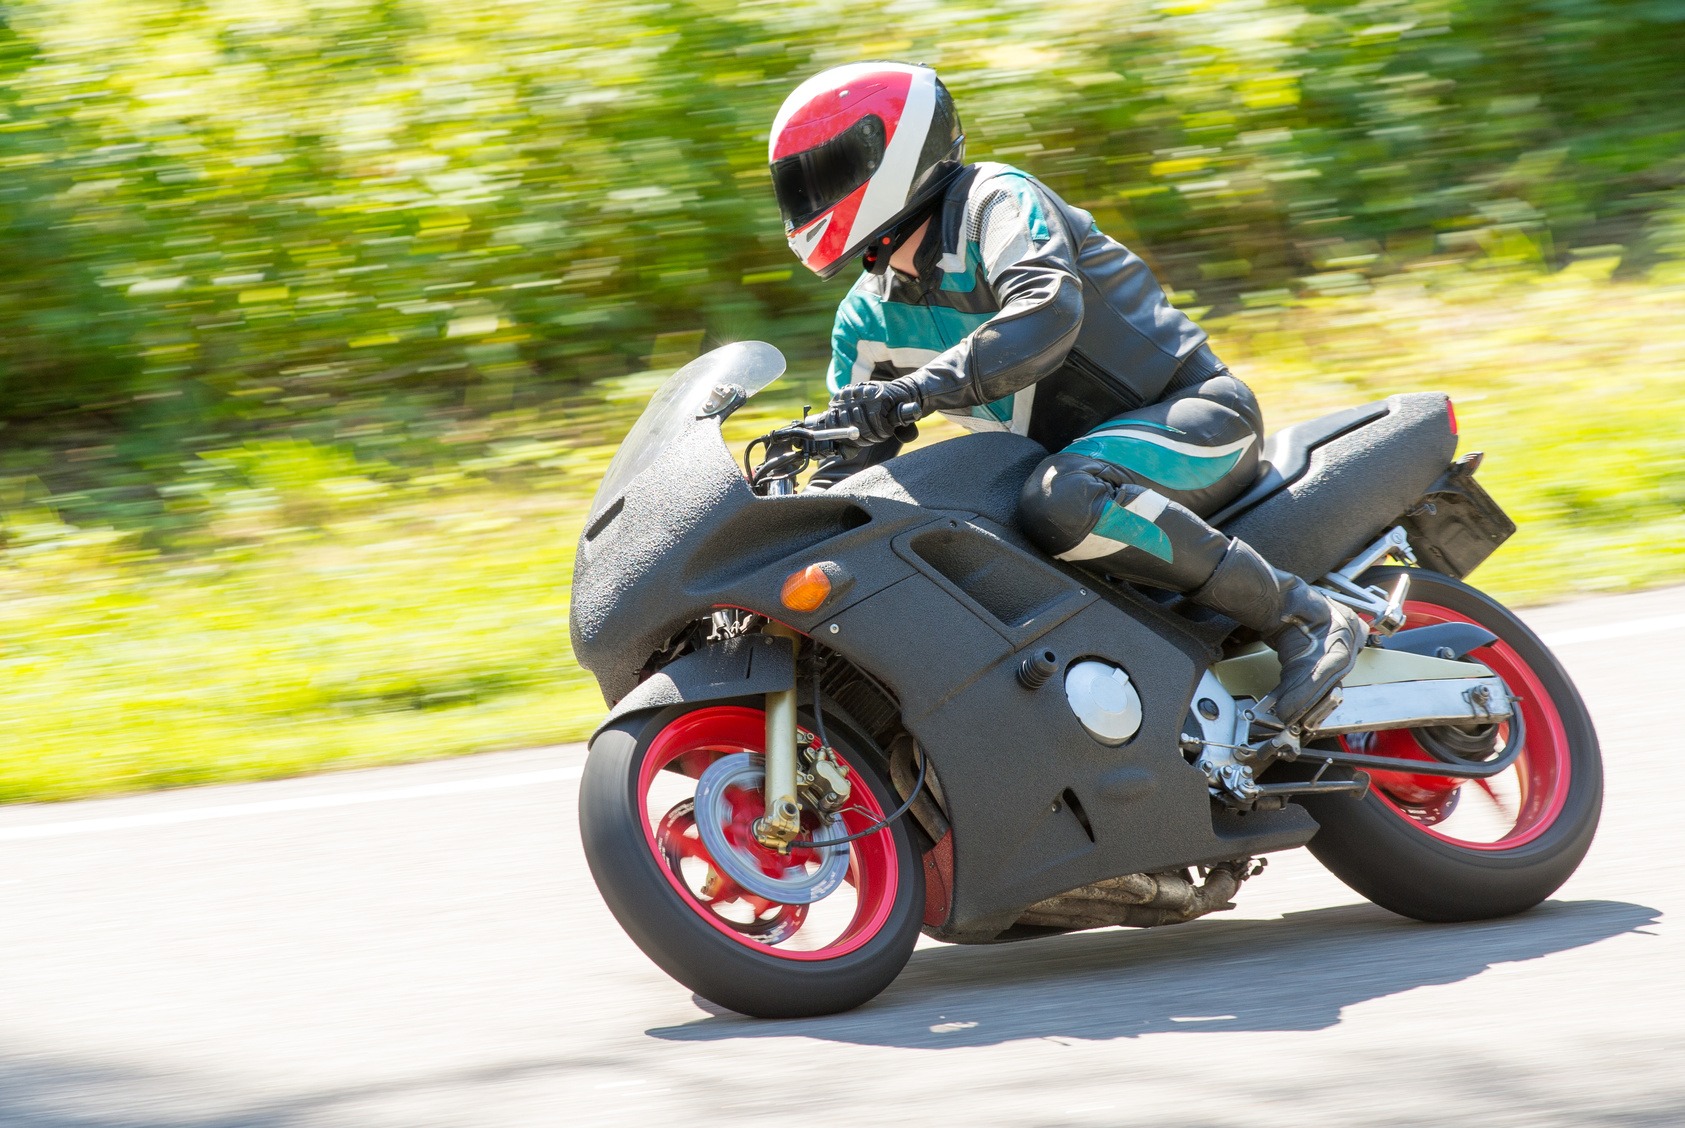 Why You Might Want To Take A Motorcycle Safety Course